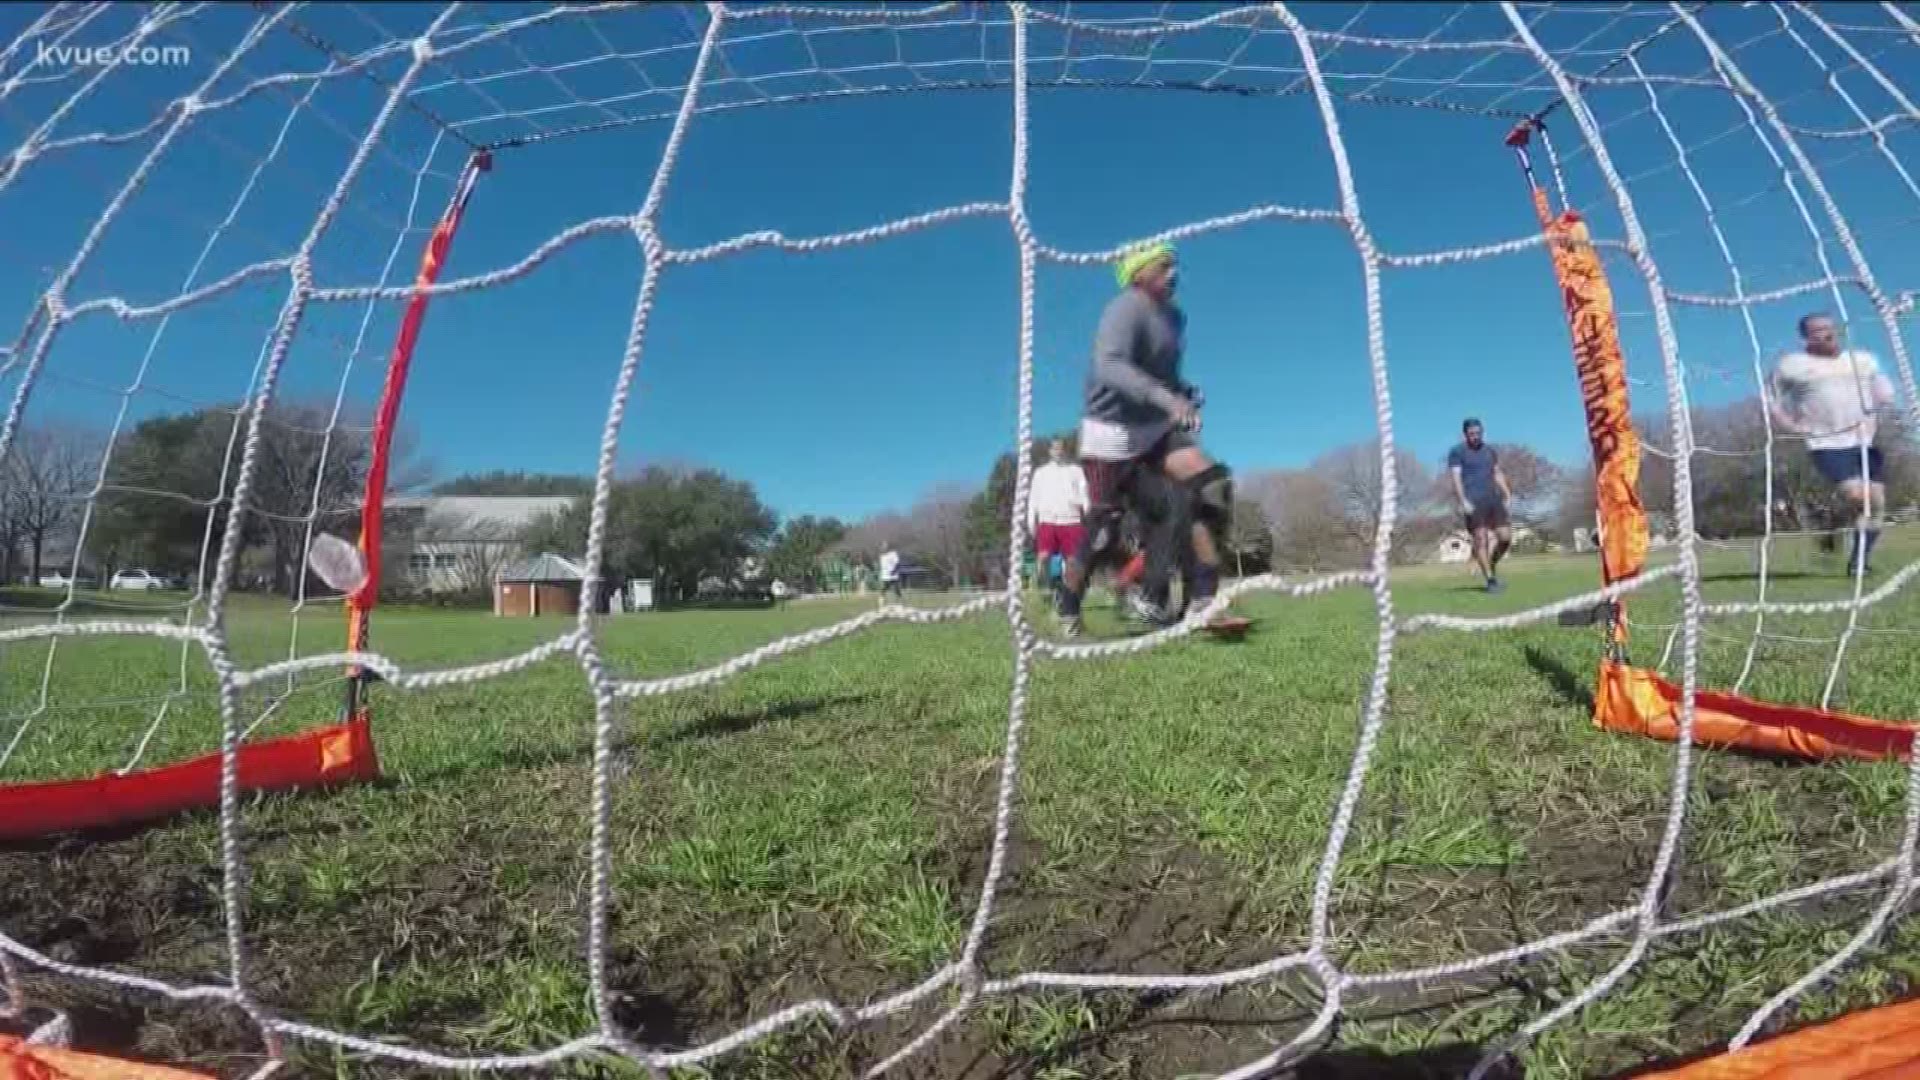 Austin's booming growth is bringing a booming interest in soccer, but some are finding it hard to find a field.